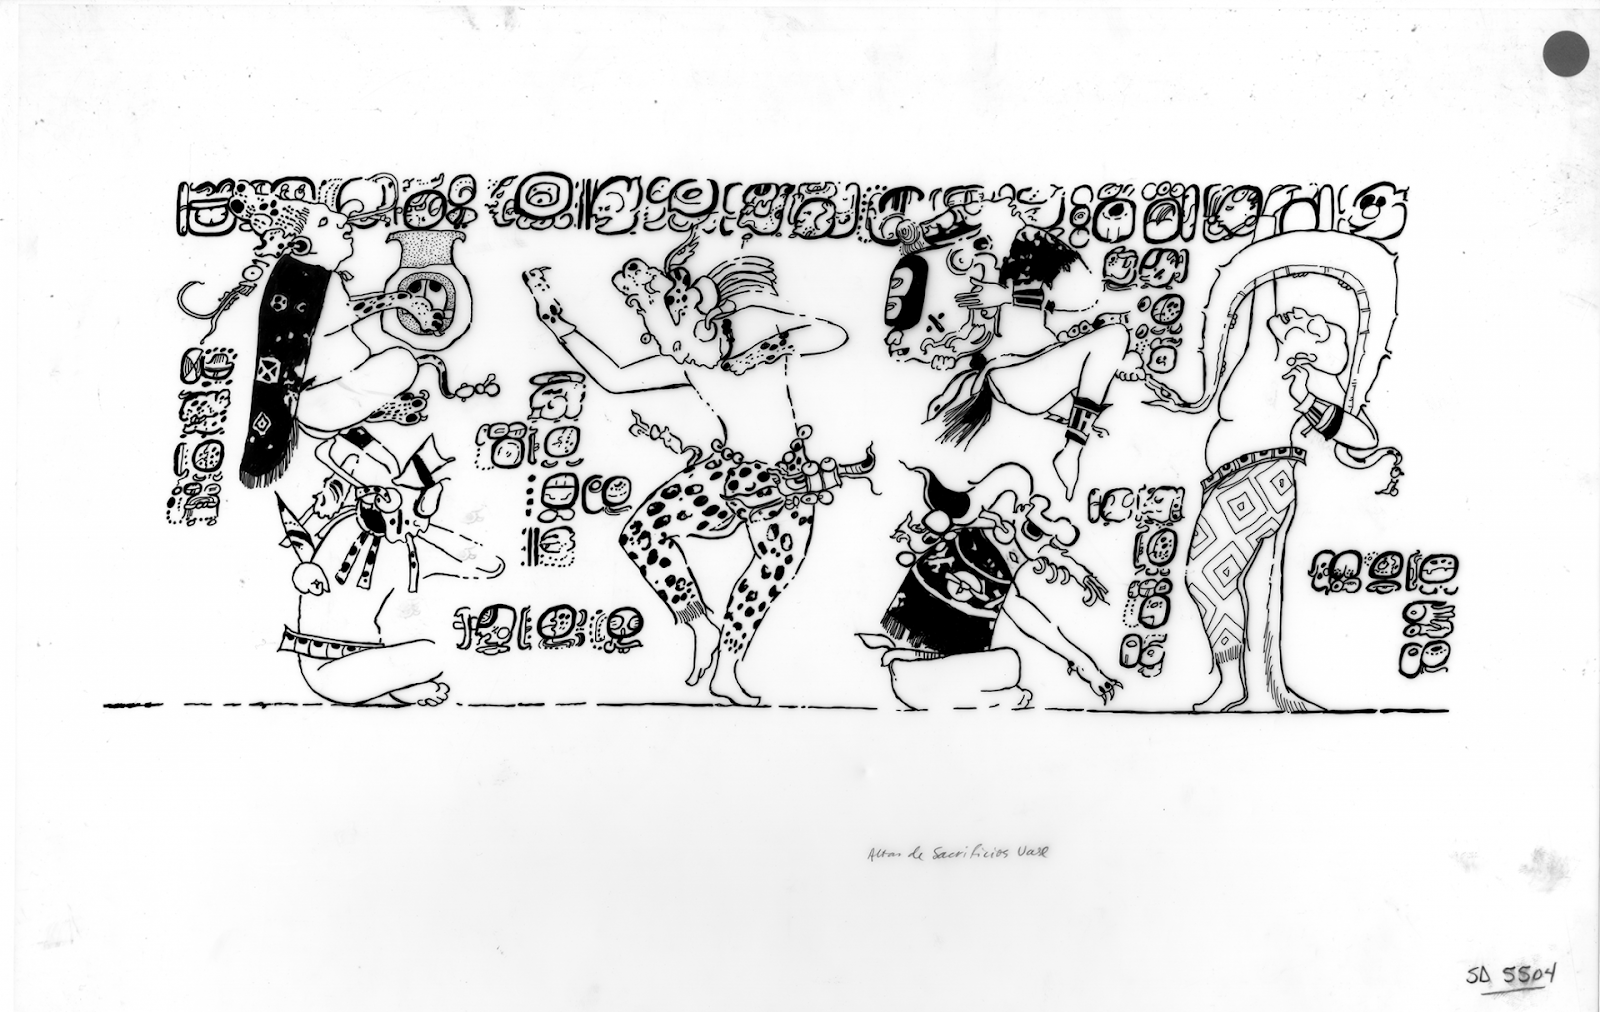 Rollout Drawing of Cylinder Vessel from Altar de Sacrificios Vase Illustrating Six Wahy Dancers, Guatemala, Eastern Peten, drawing by Linda Schele (SD-5504) © David Schele, photo courtesy Ancient Americas at LACMA (ancientamericas.org)